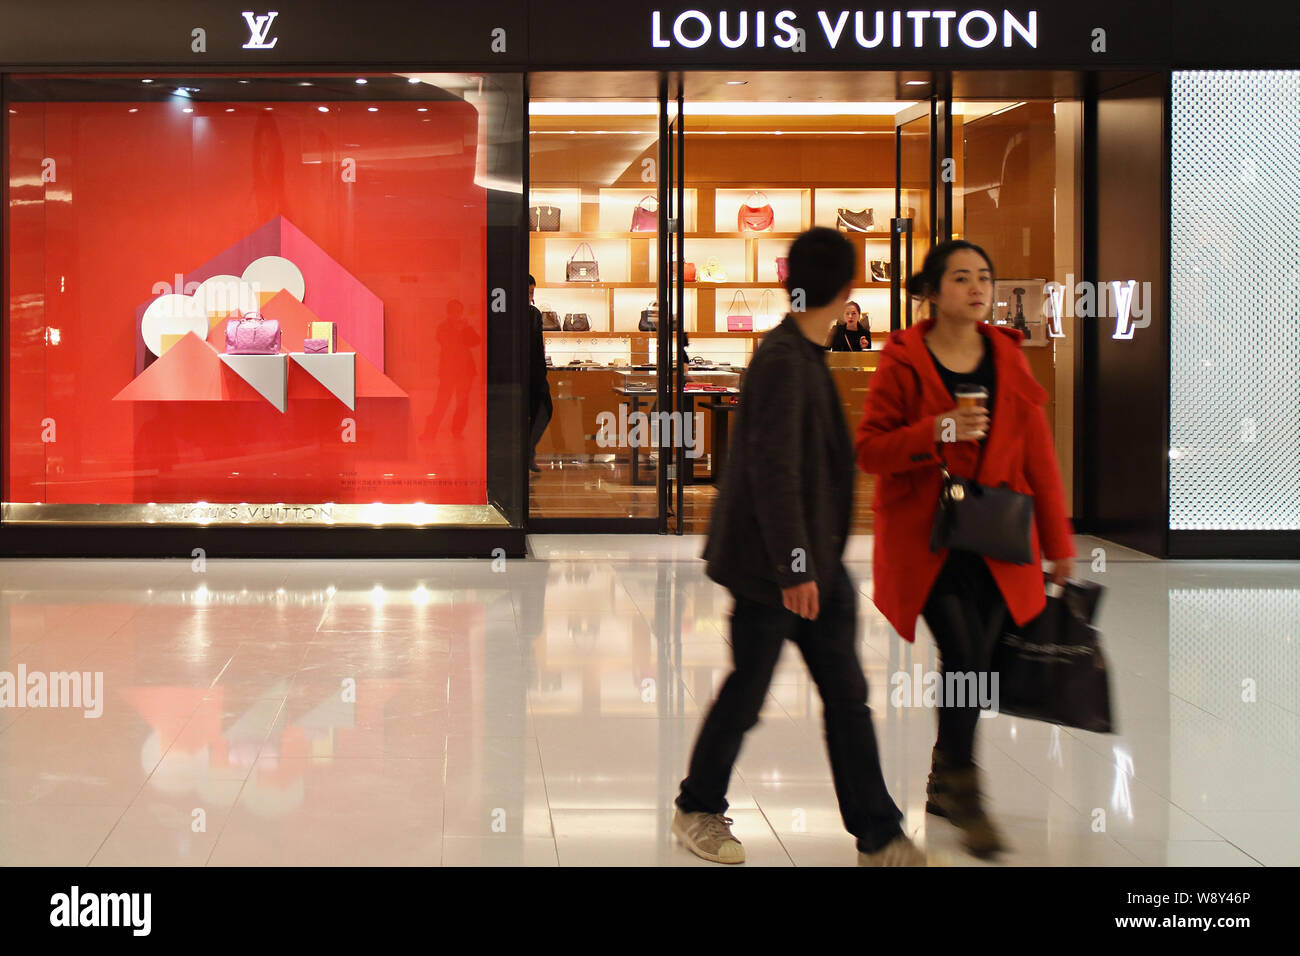 An LVMH store (Moet Hennessy. Louis Vuitton) at 22 Avenue